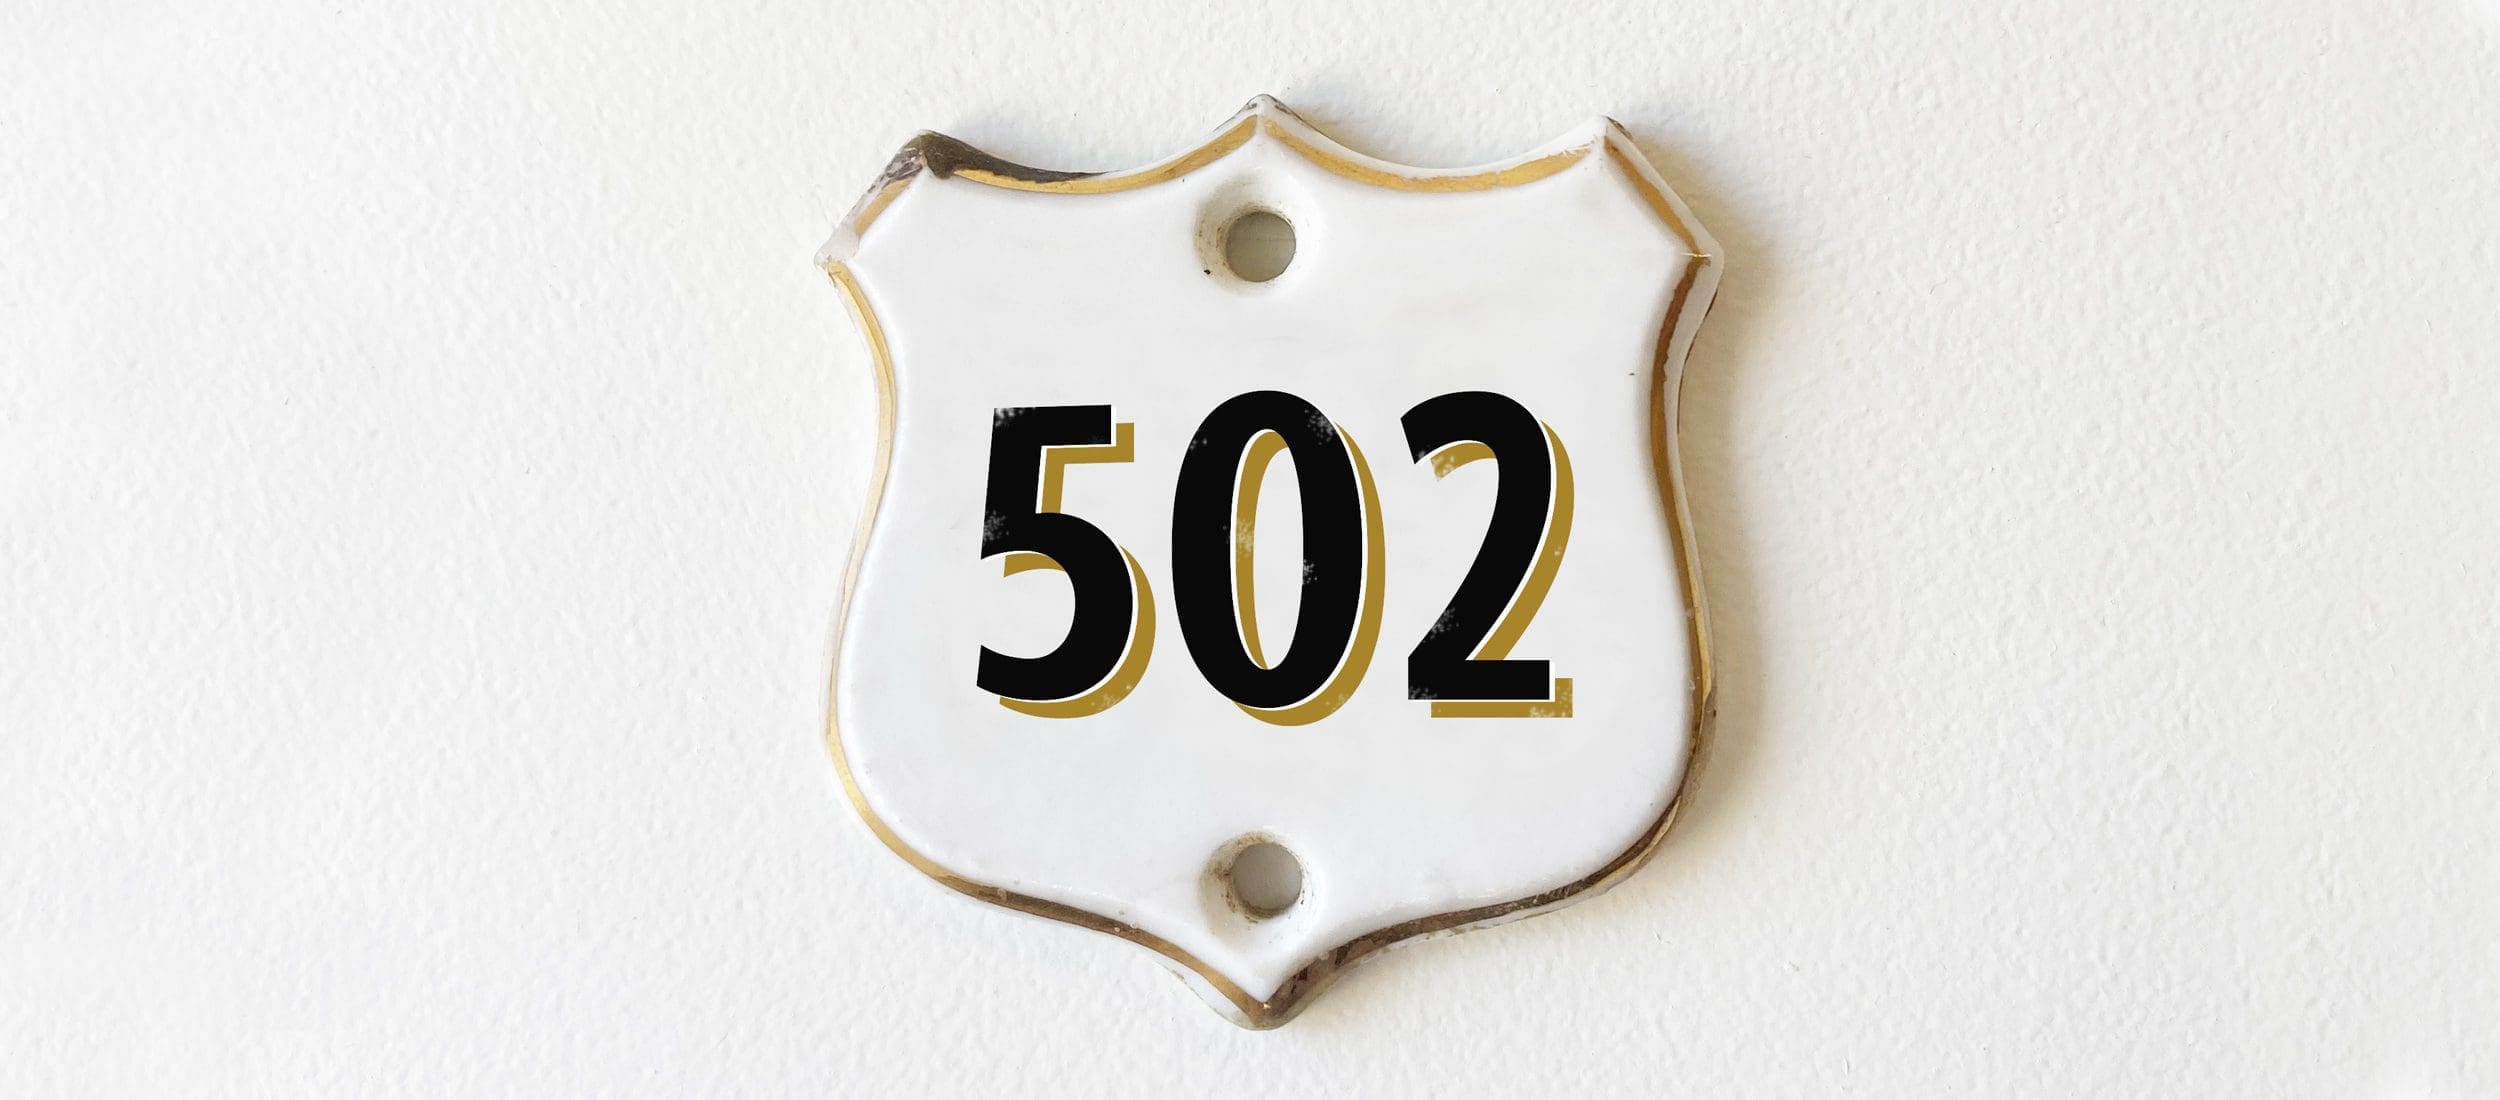 Hotel Room Plate for Room 502